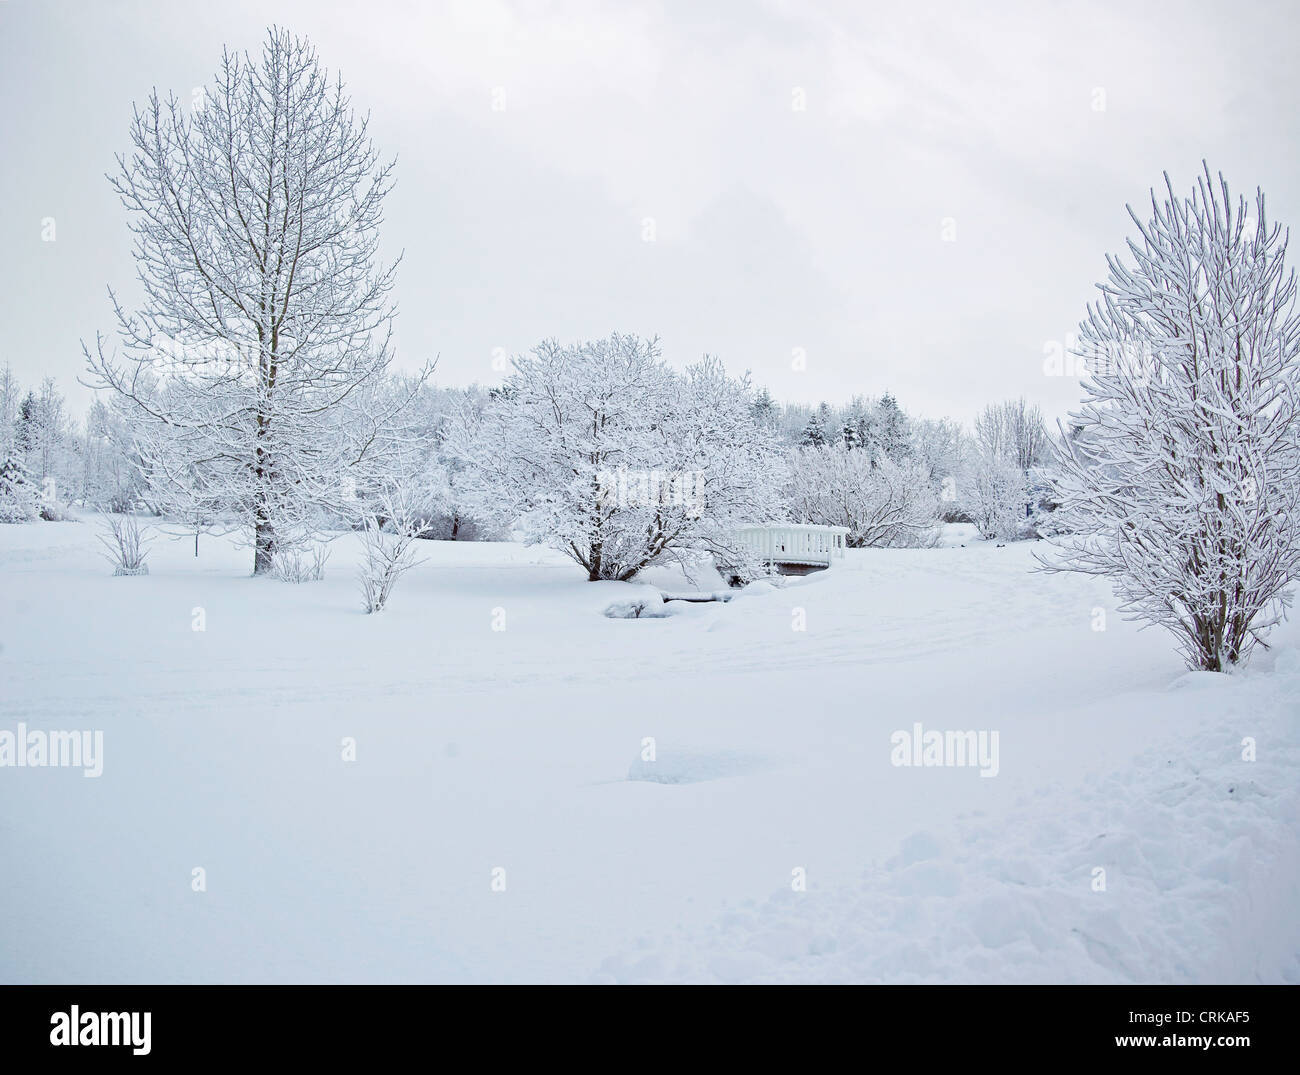 Trees in snowy landscape Stock Photo